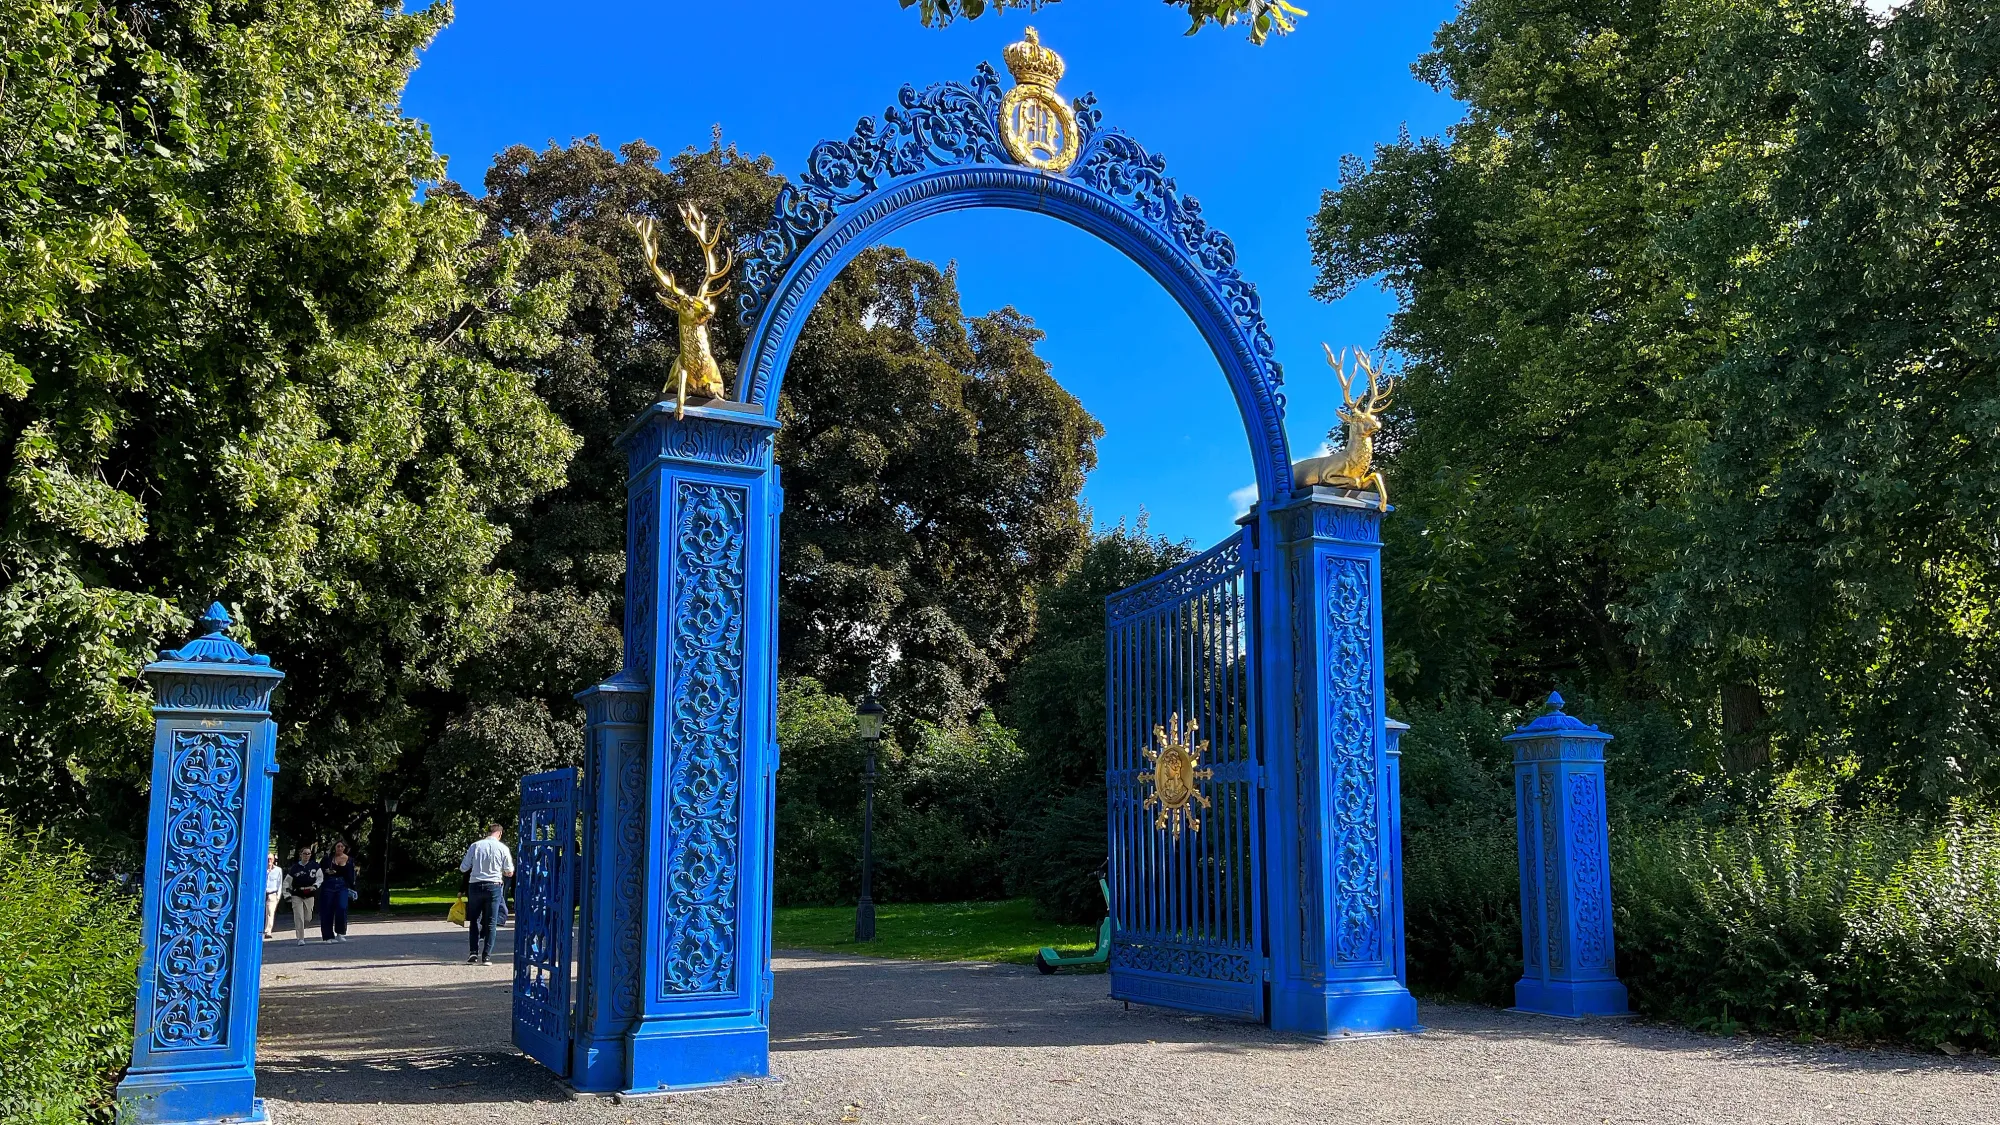 Blue gate with golden stags open to a public park